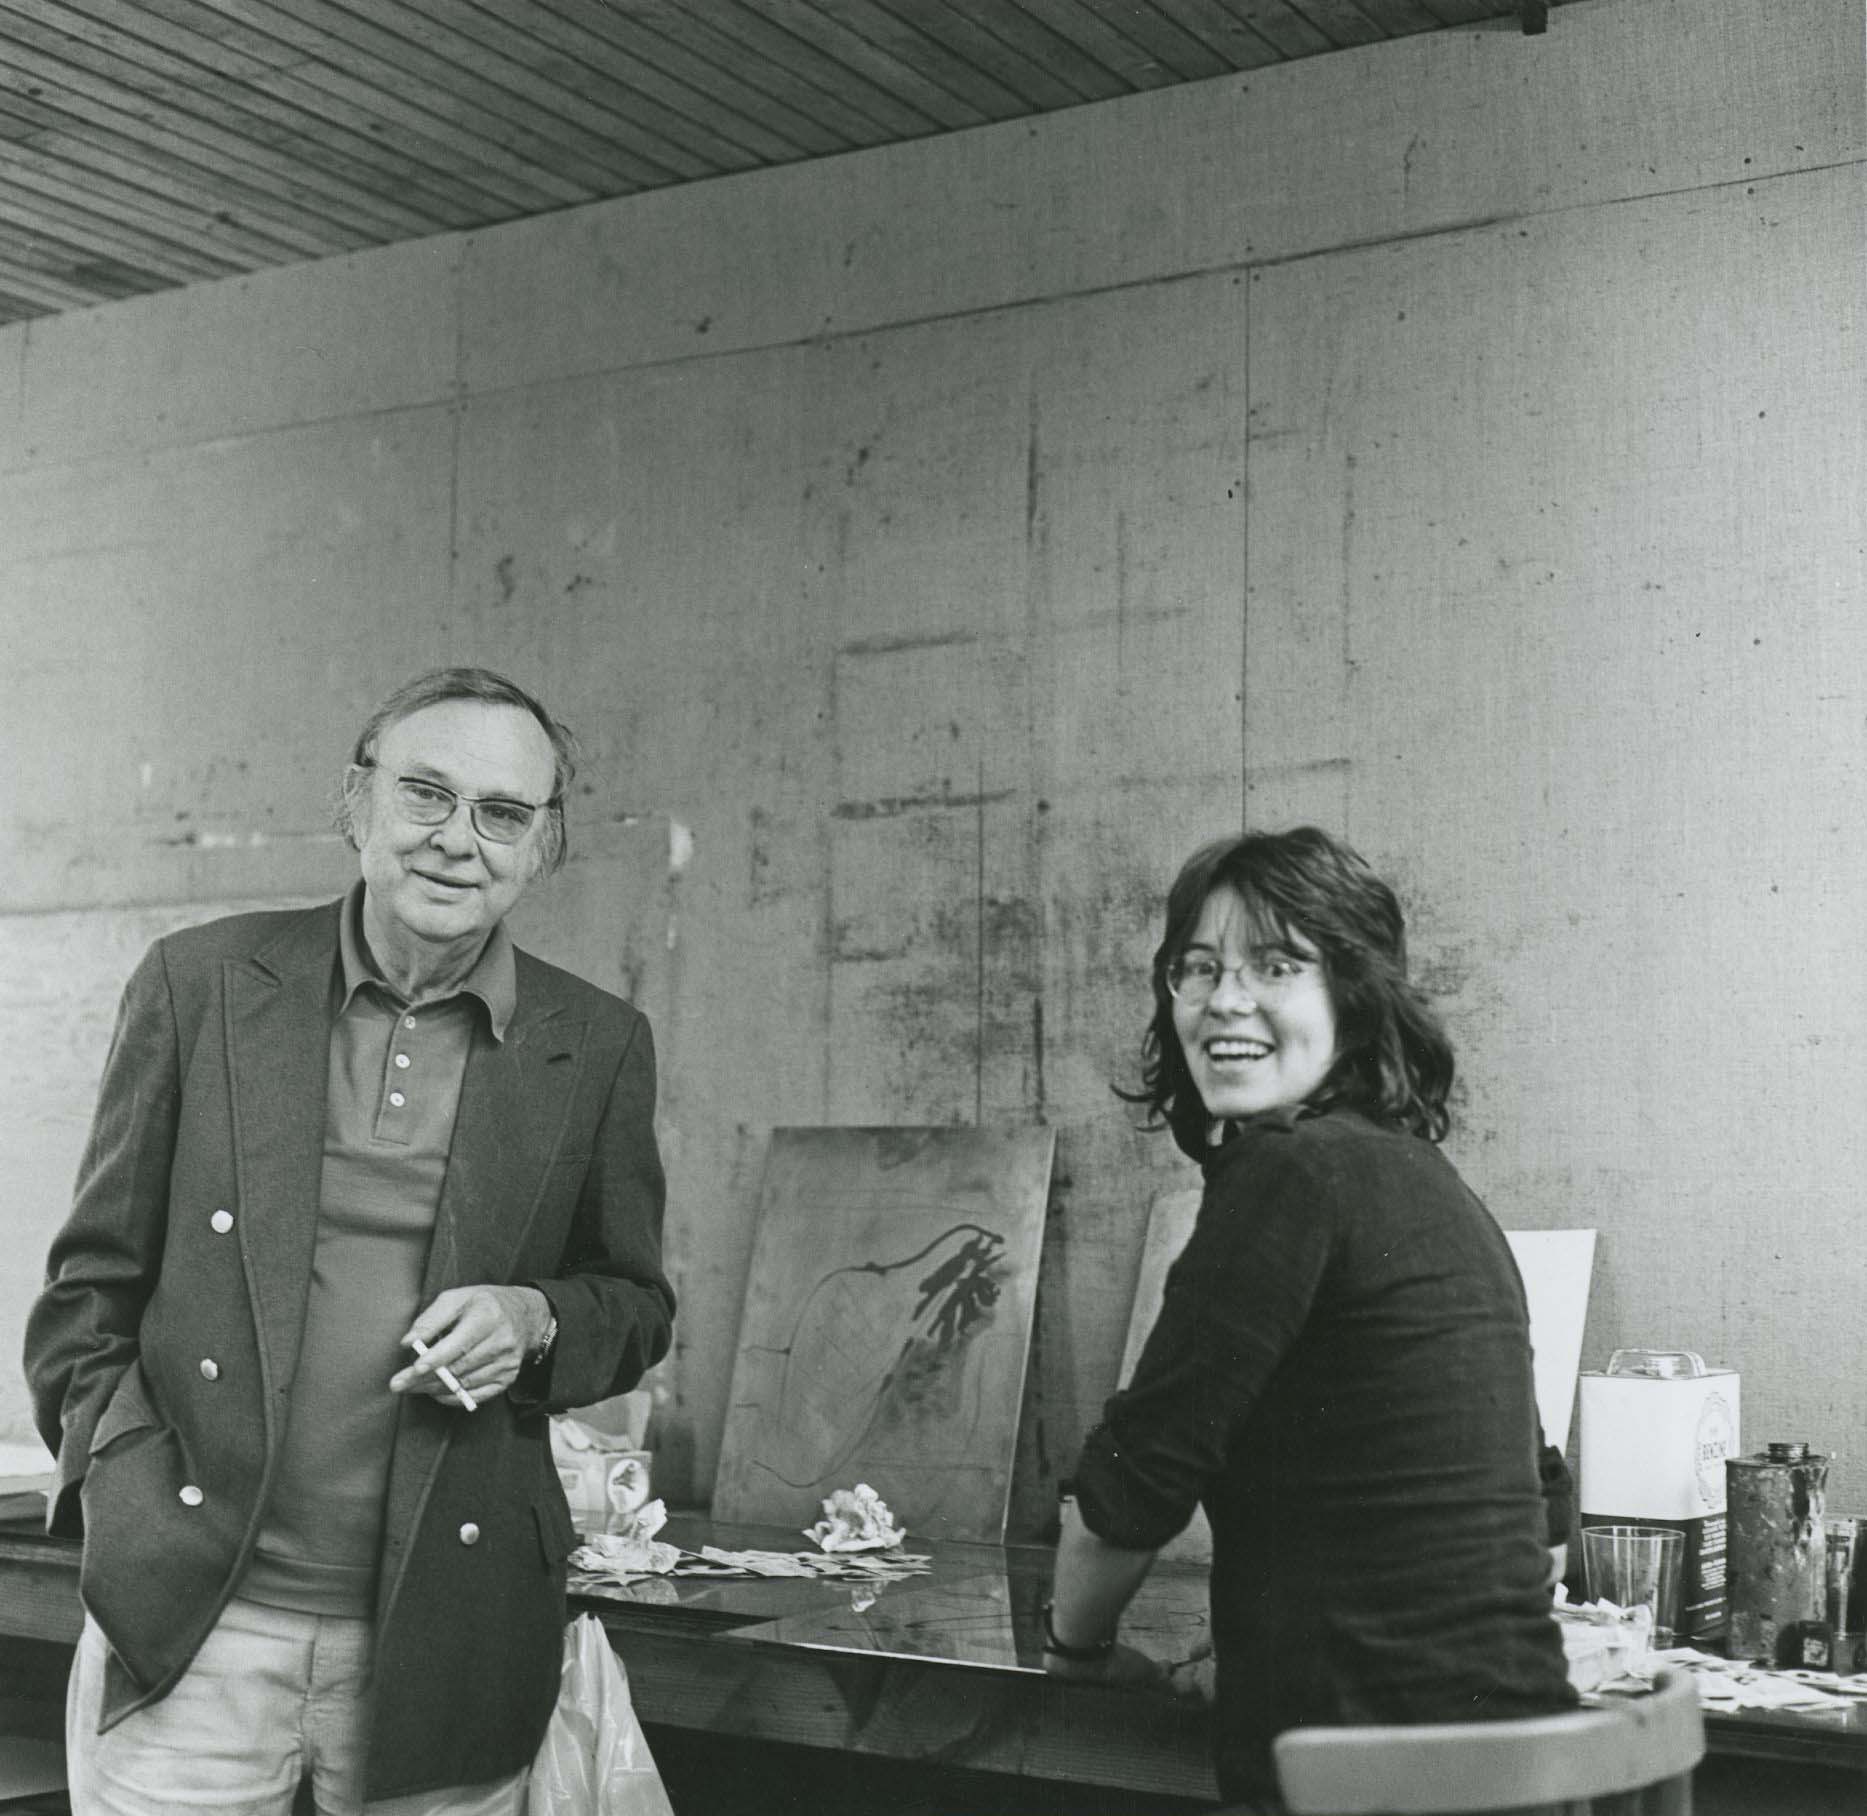 Motherwell and Catherine Mosley in his Greenwich studio, November 1973